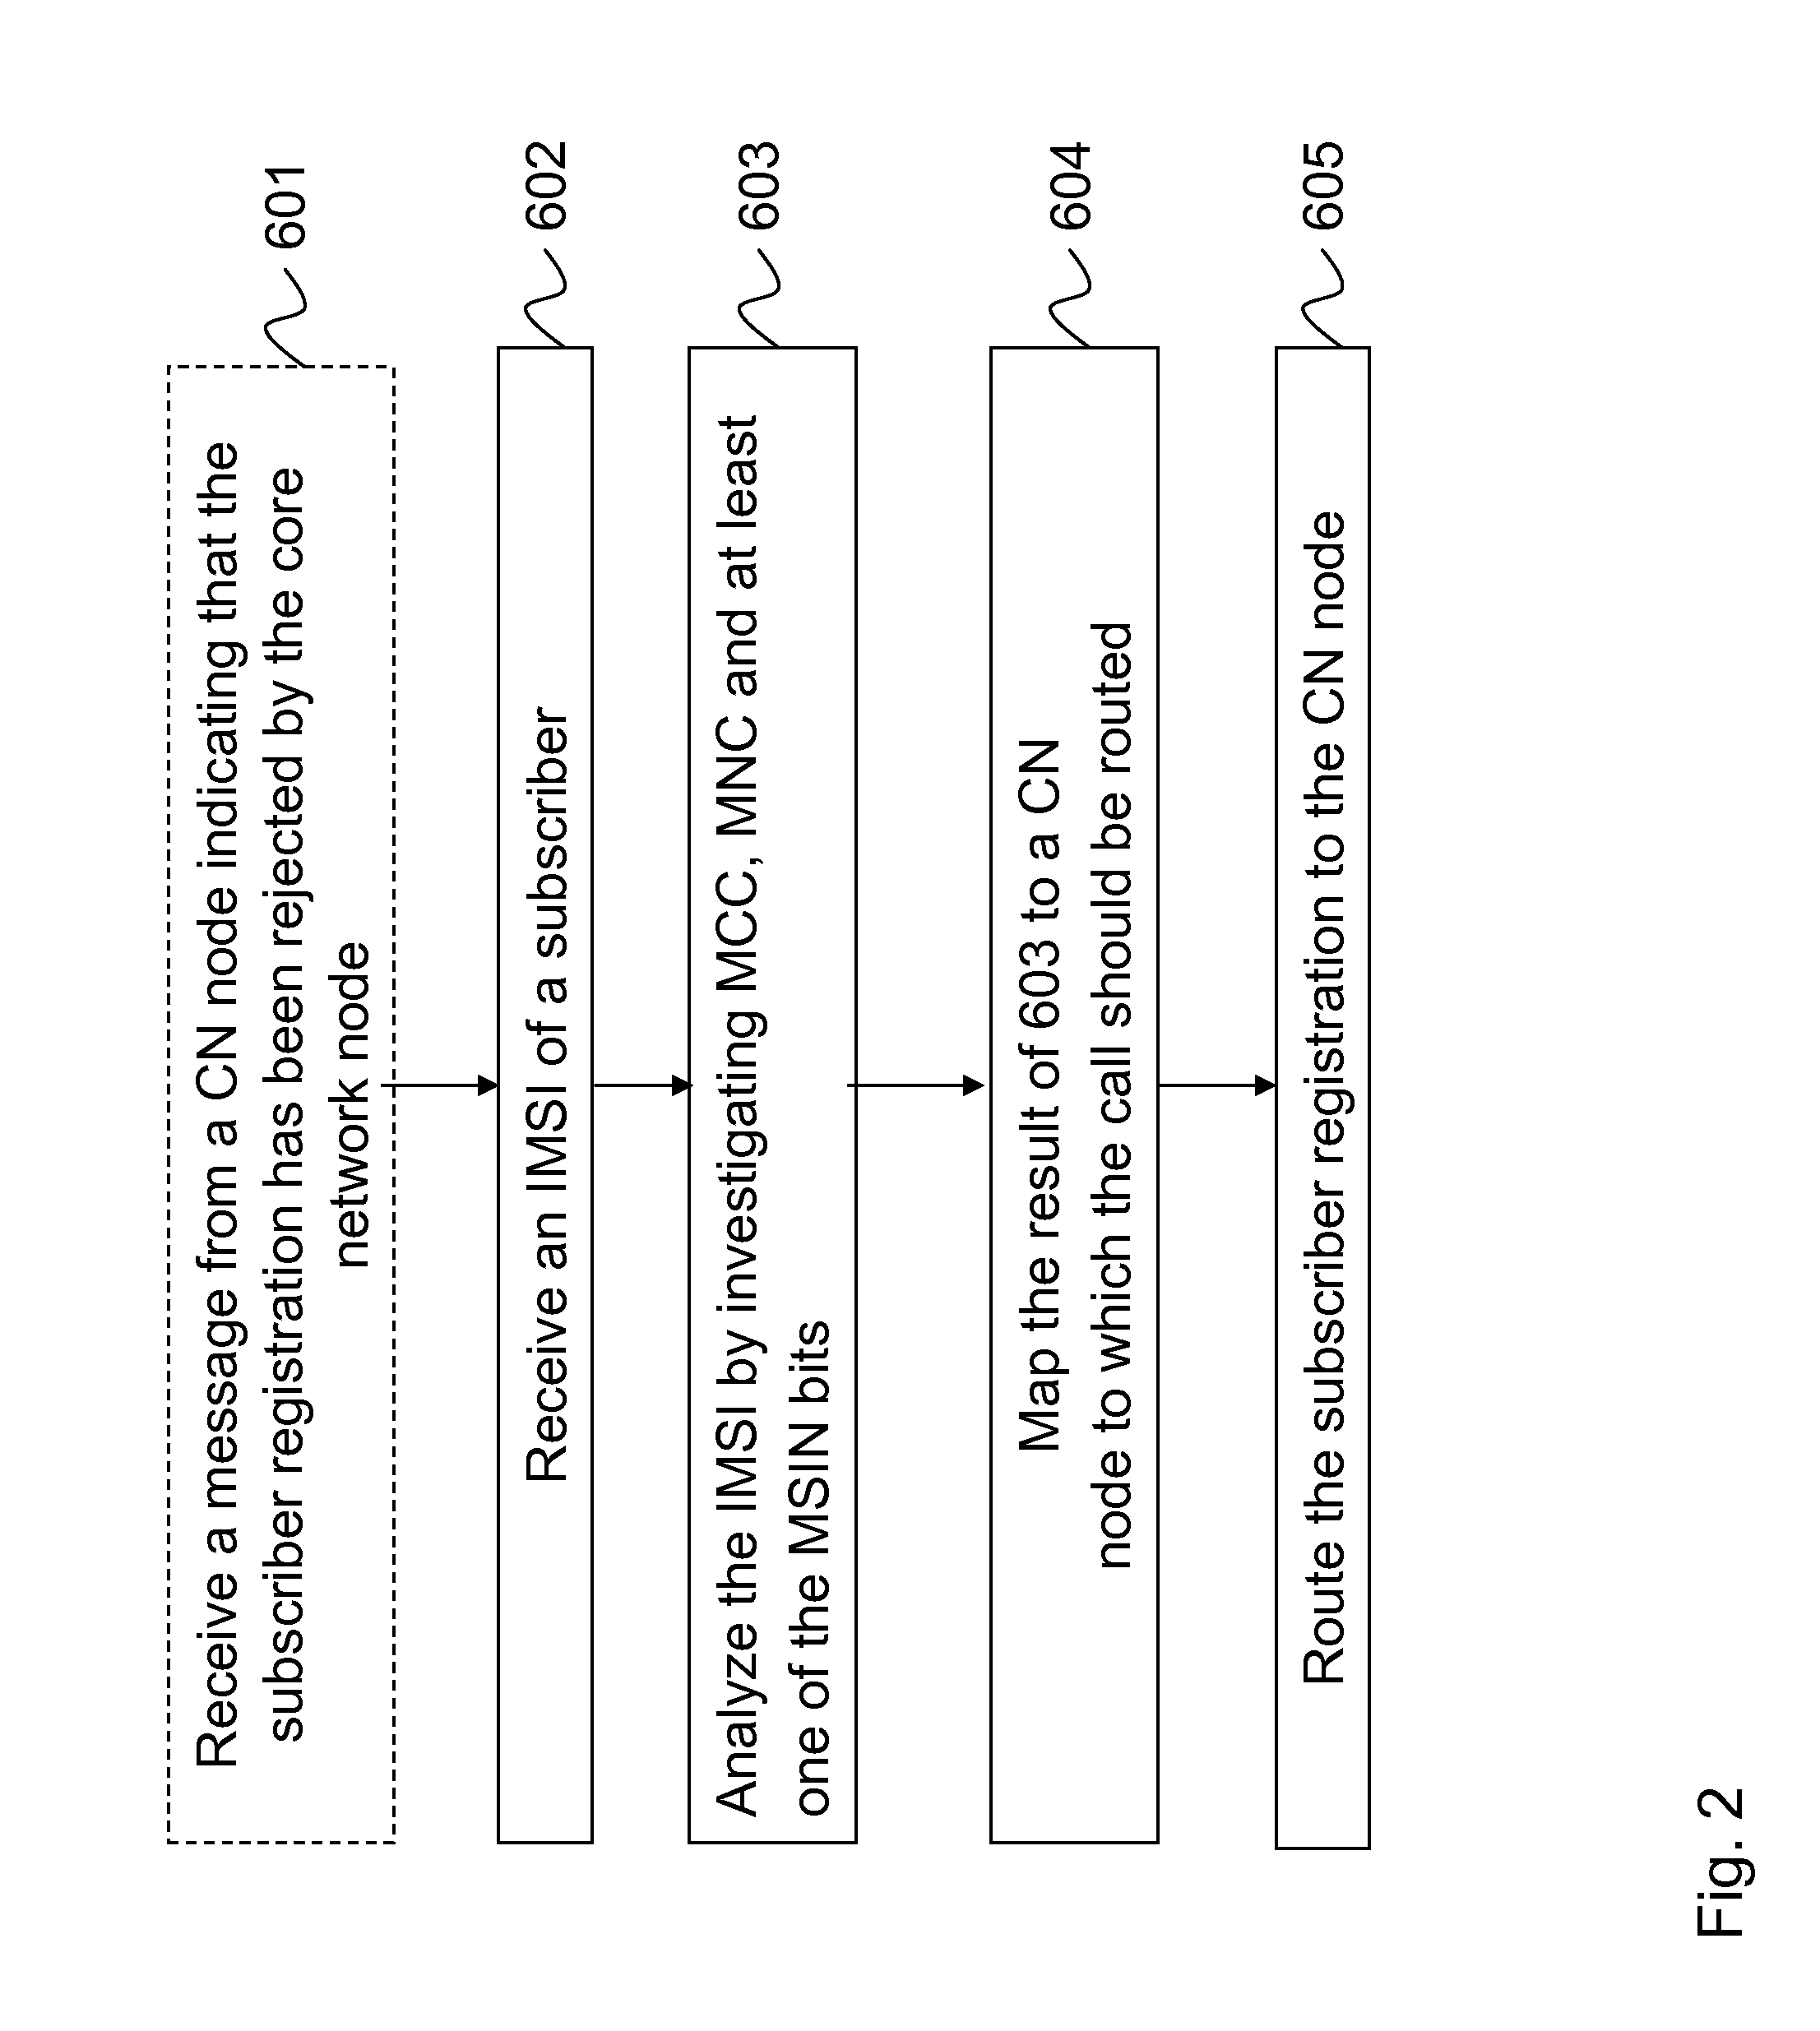 Methods and Network Nodes in a Mobile Communication Network